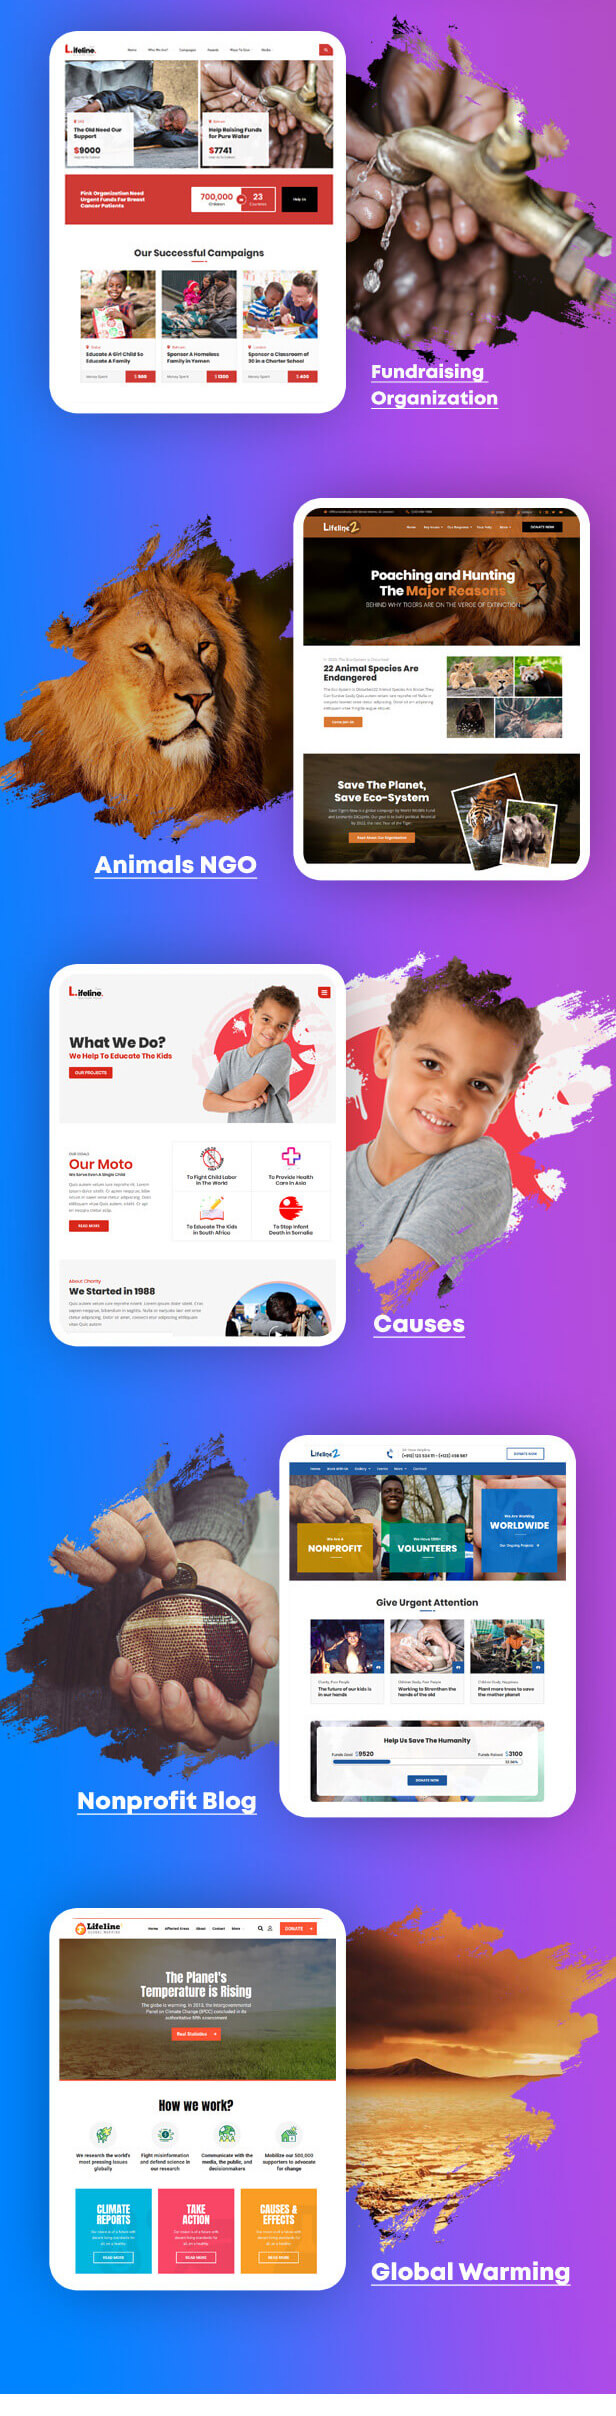 Lifeline 2 - An Ultimate Nonprofit WordPress Theme for Charity, Fundraising and NGO Organizations - 5